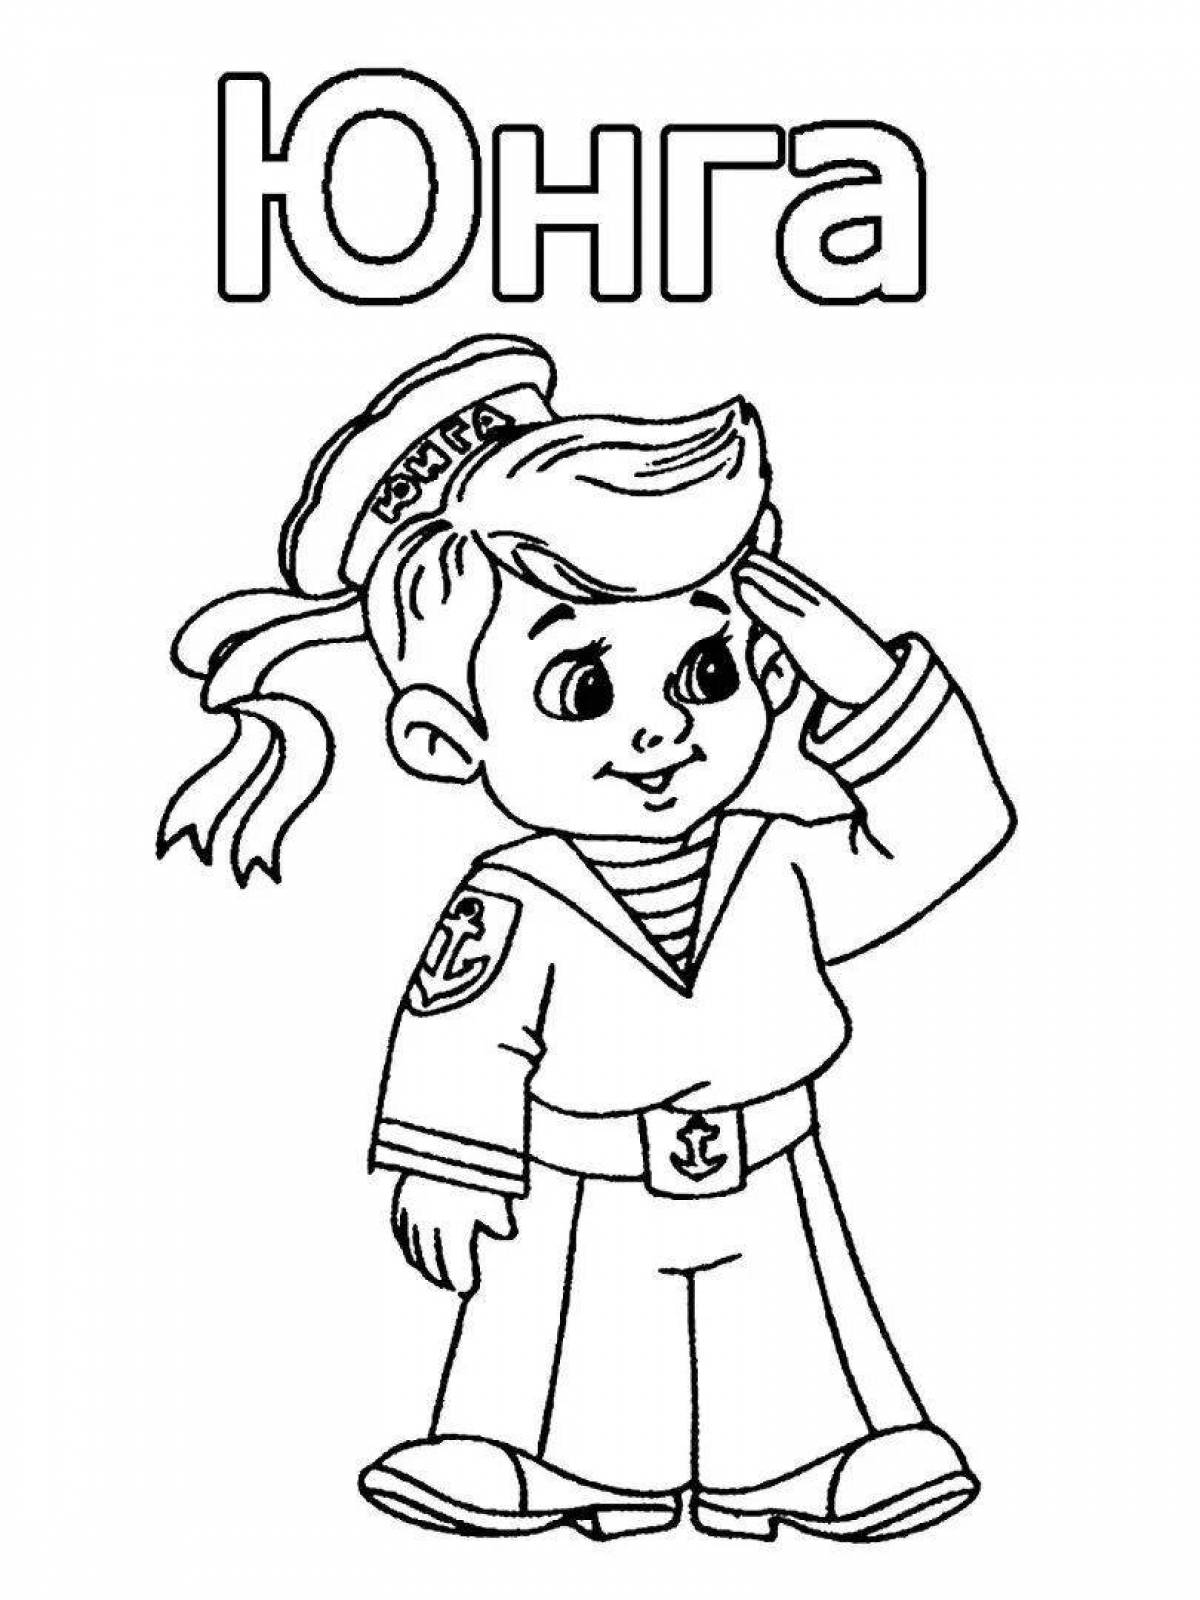 Coloring page happy sailor for kids